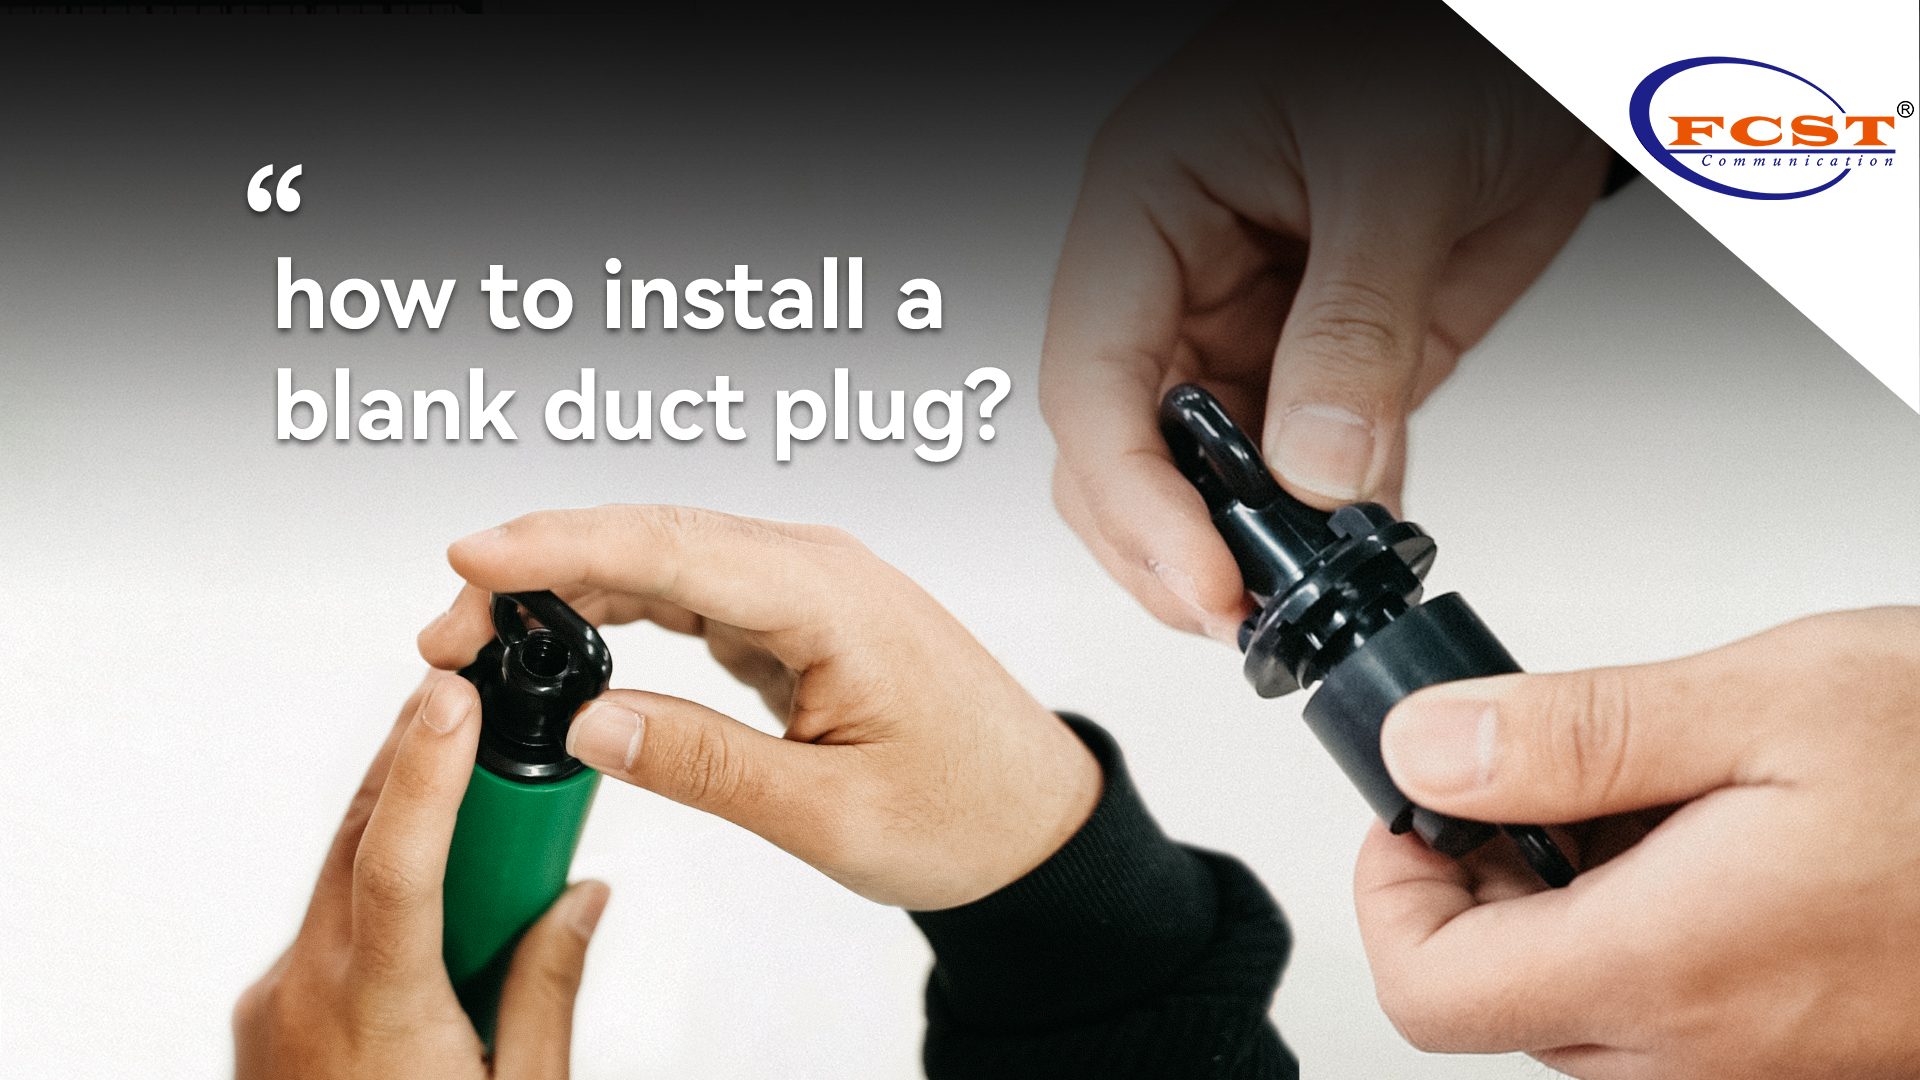 How to install a blank duct plug?